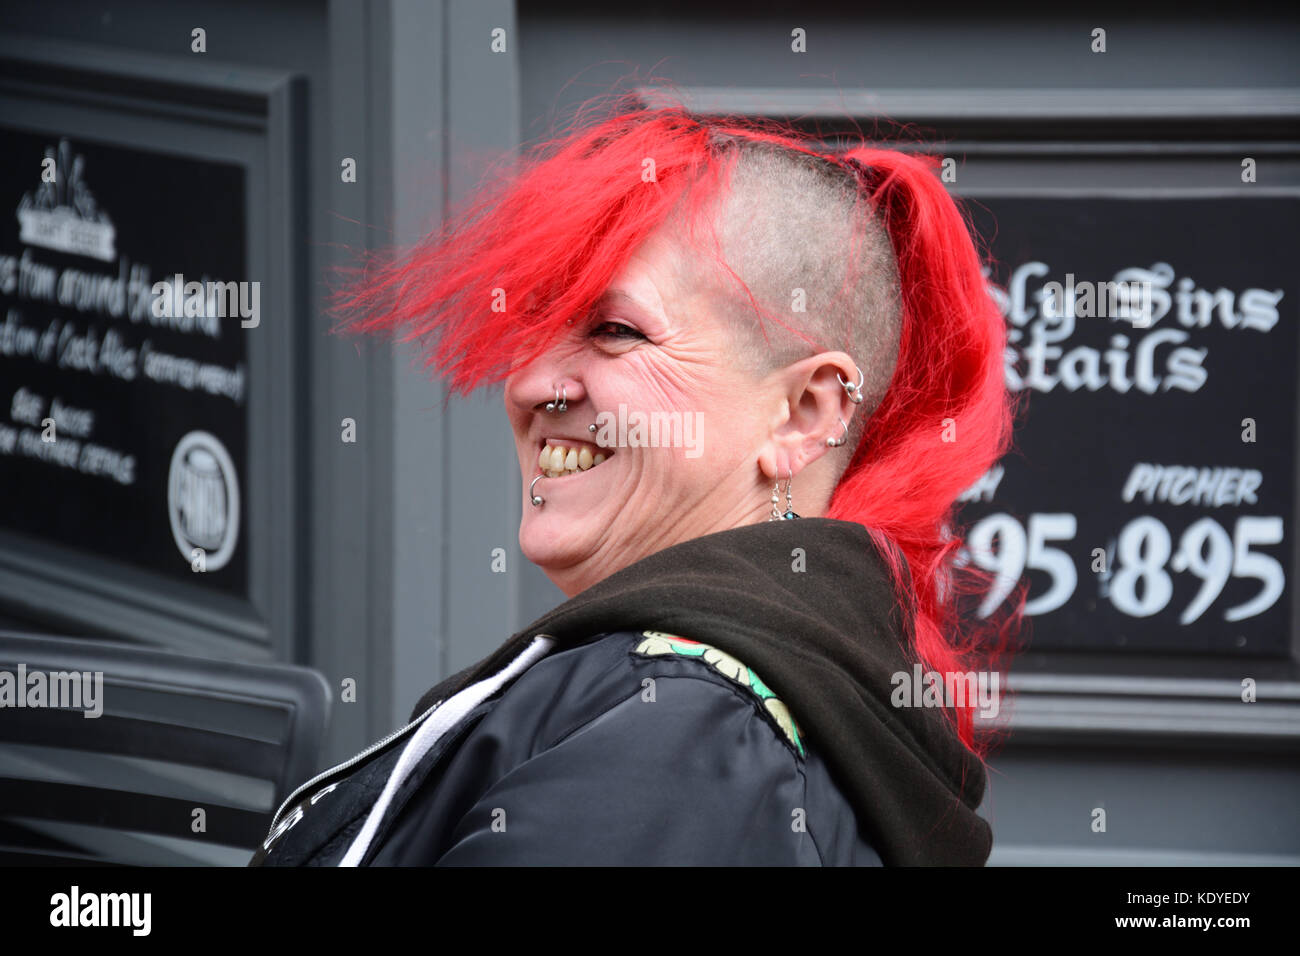 Woman with red hair & piercings. Stock Photo